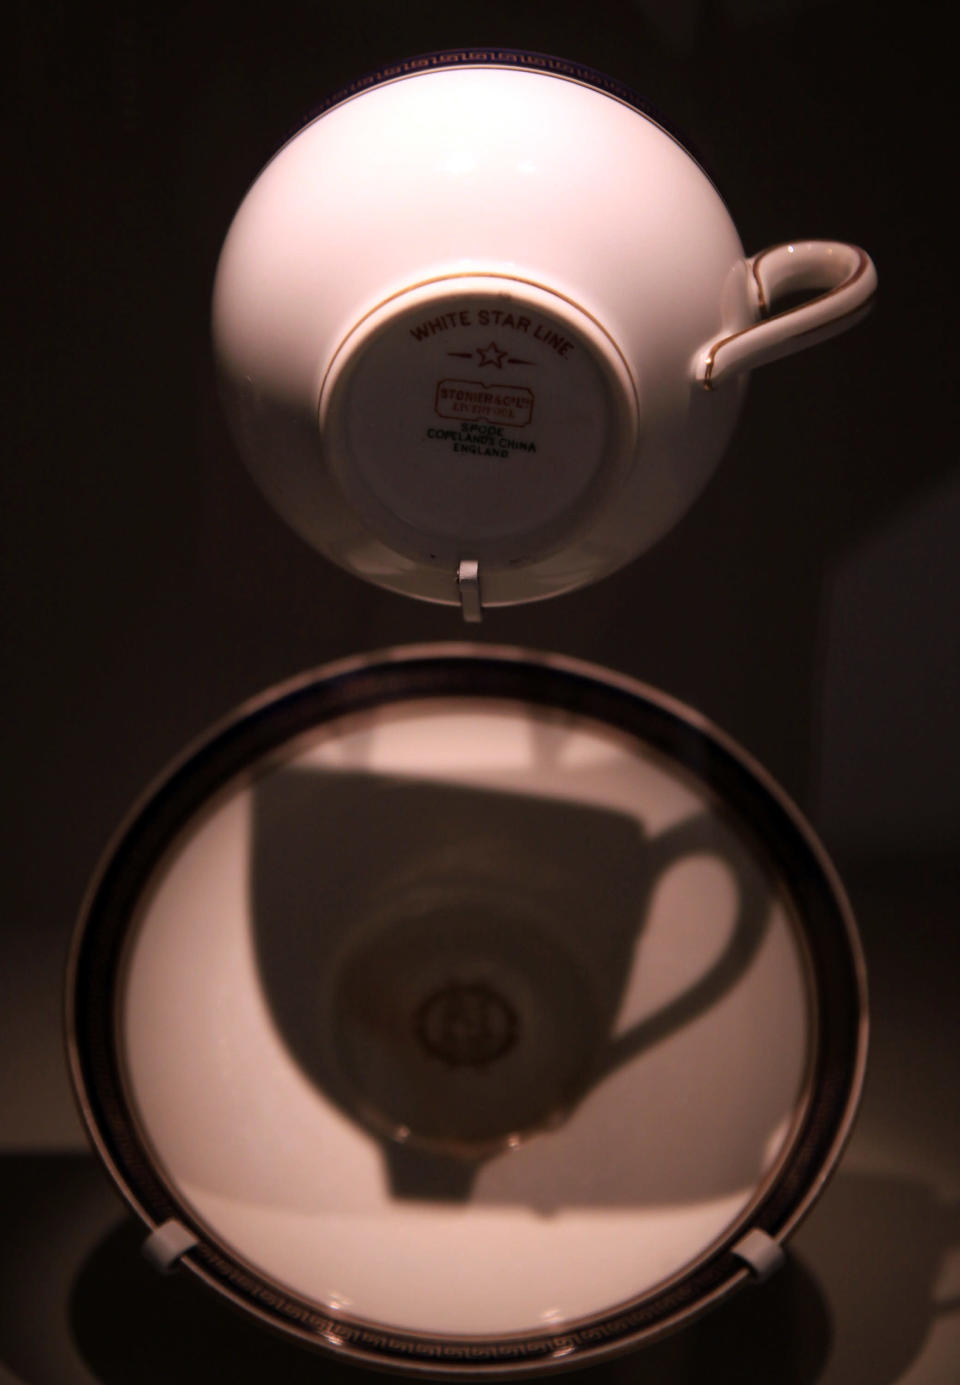 A White Star Line tea cup is exhibited at the SeaCity Museum's Titanic exhibition on April 3, 2012 in Southampton, England. The new SeaCity Museum, which will open at 1.30pm on April 10, 100 years to the day since the Titanic set sail from the city. The museum, which cost 15 GBP million, promises to tell the largely untold story of Southampton's Titanic crew and the impact the tragedy had on the city, as well as featuring other aspects of the city's seafaring past. (Photo by Matt Cardy/Getty Images)